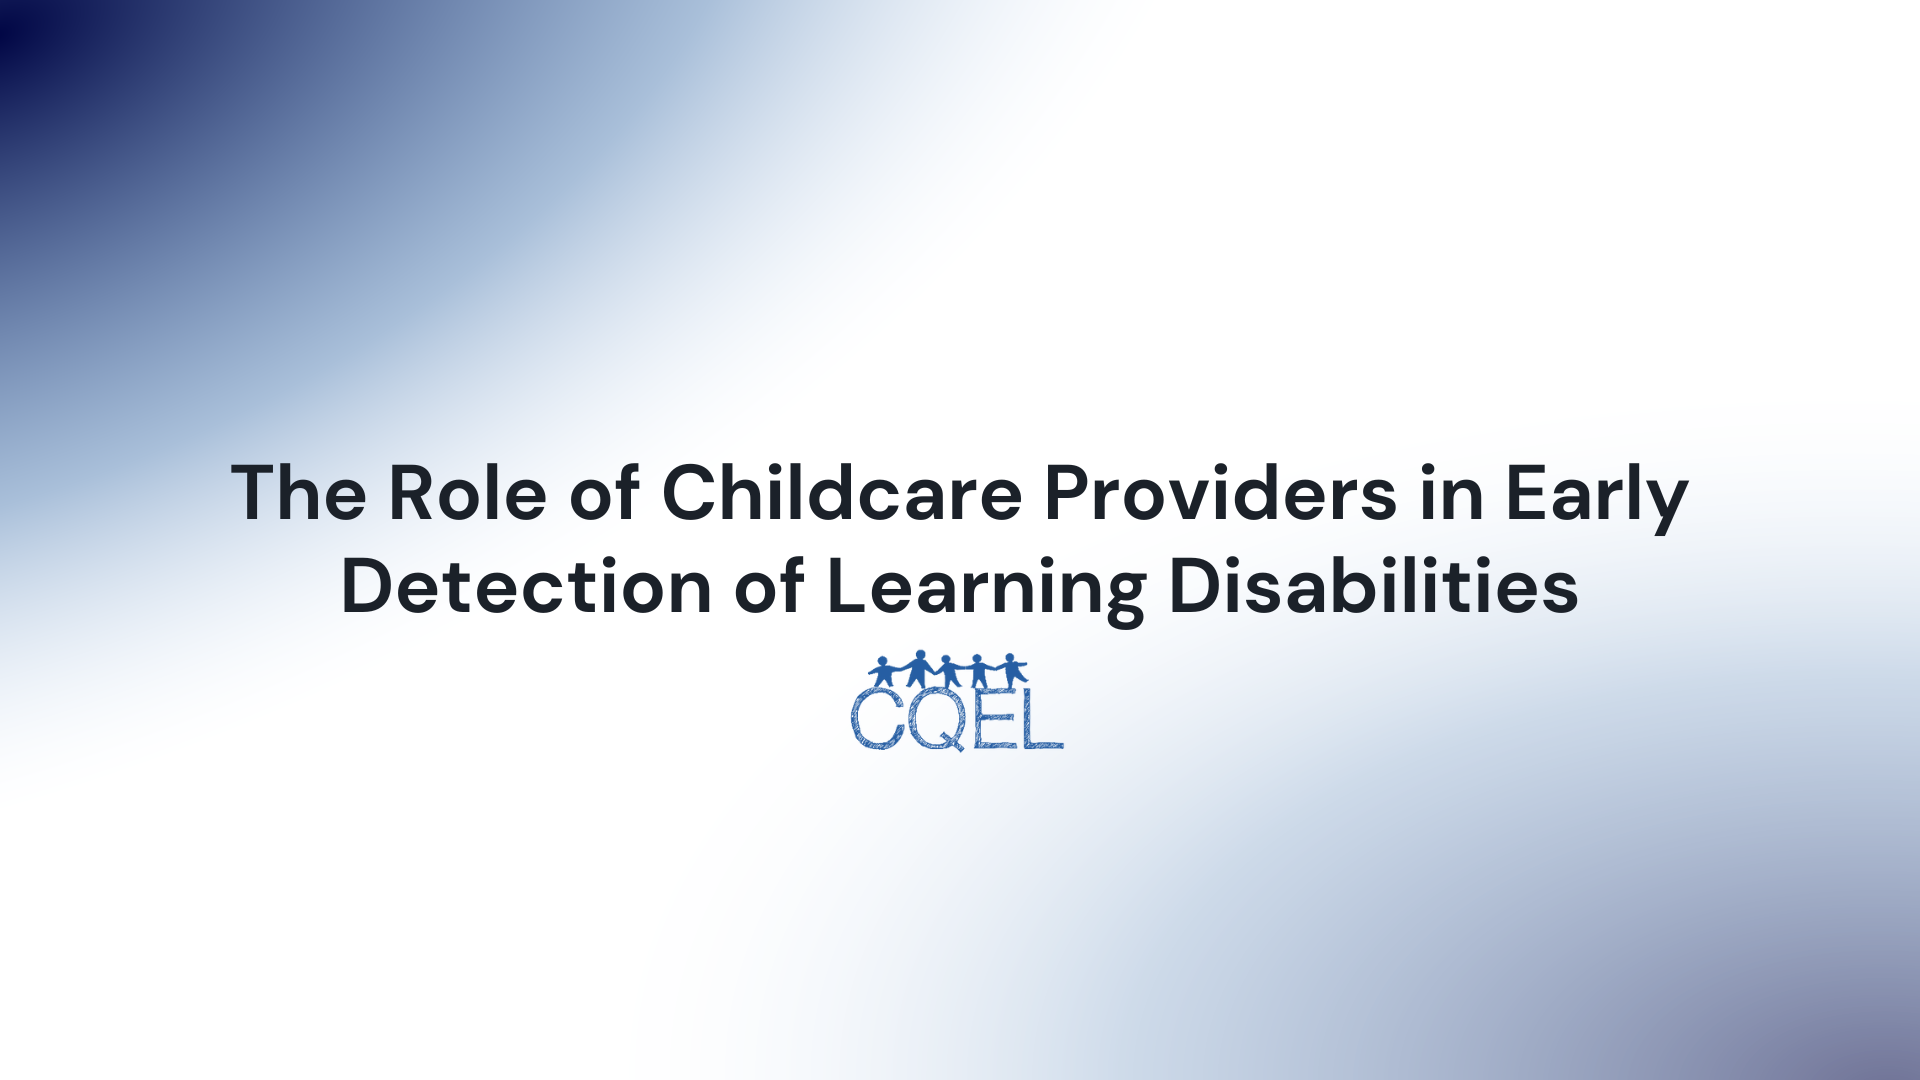 The Role of Childcare Providers in Early Detection of Learning Disabilities